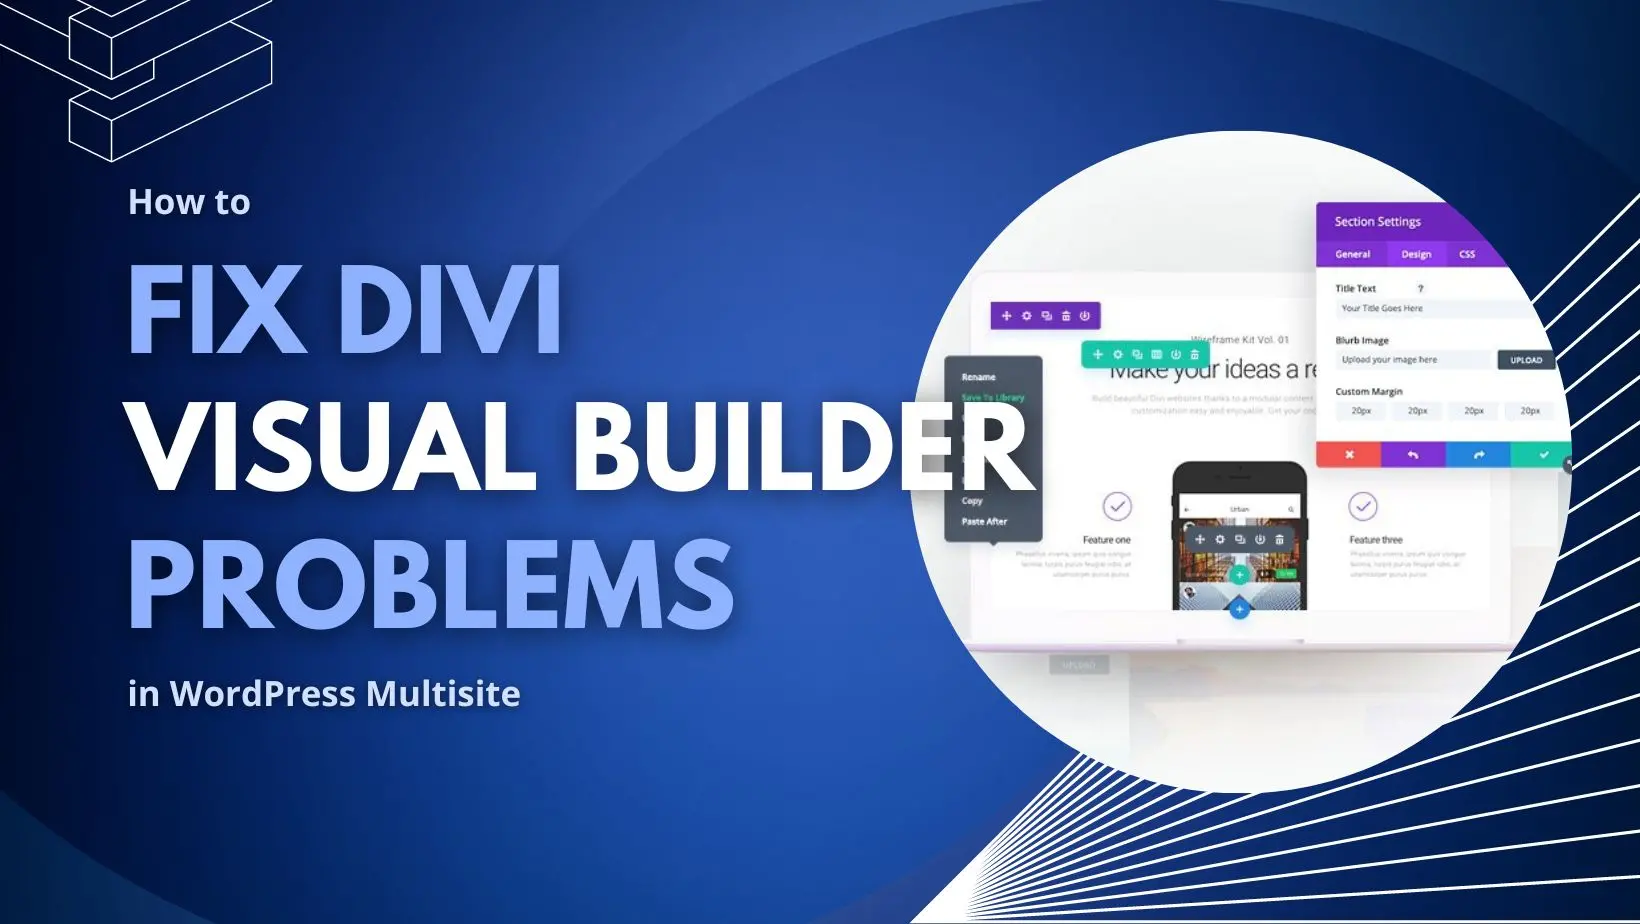 How to Solve Divi Issues on WordPress Multisites - WordPress Maintenance by  Webidextrous